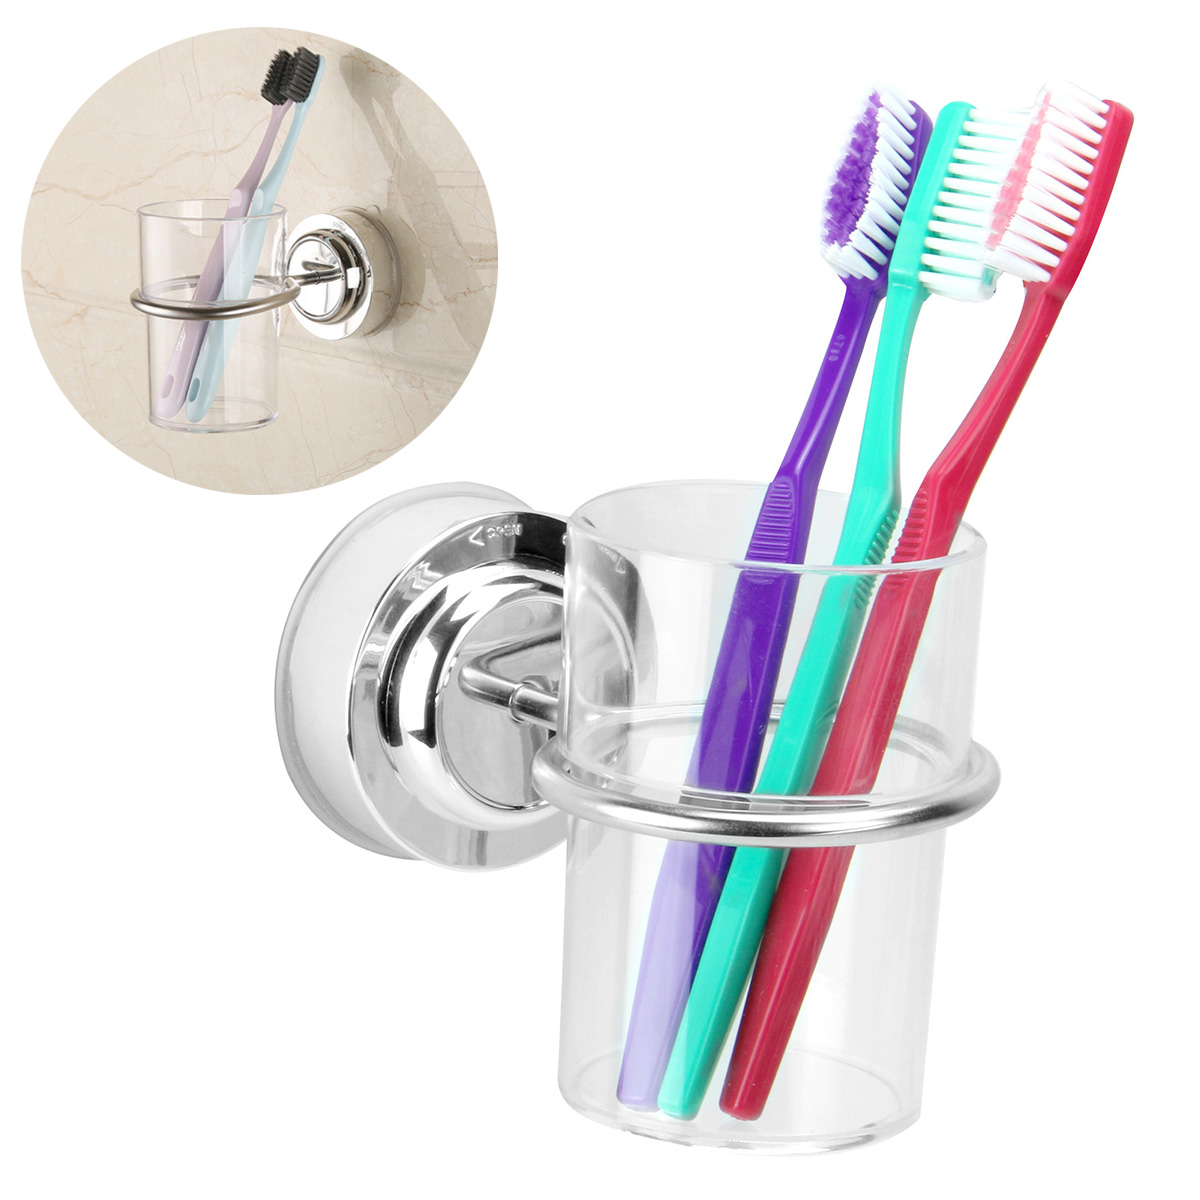 Bathroom-Suction-Wall-Mounted-Single-Stainless-Toothbrush-Tumbler-Holder-with-Cup-1758217-2